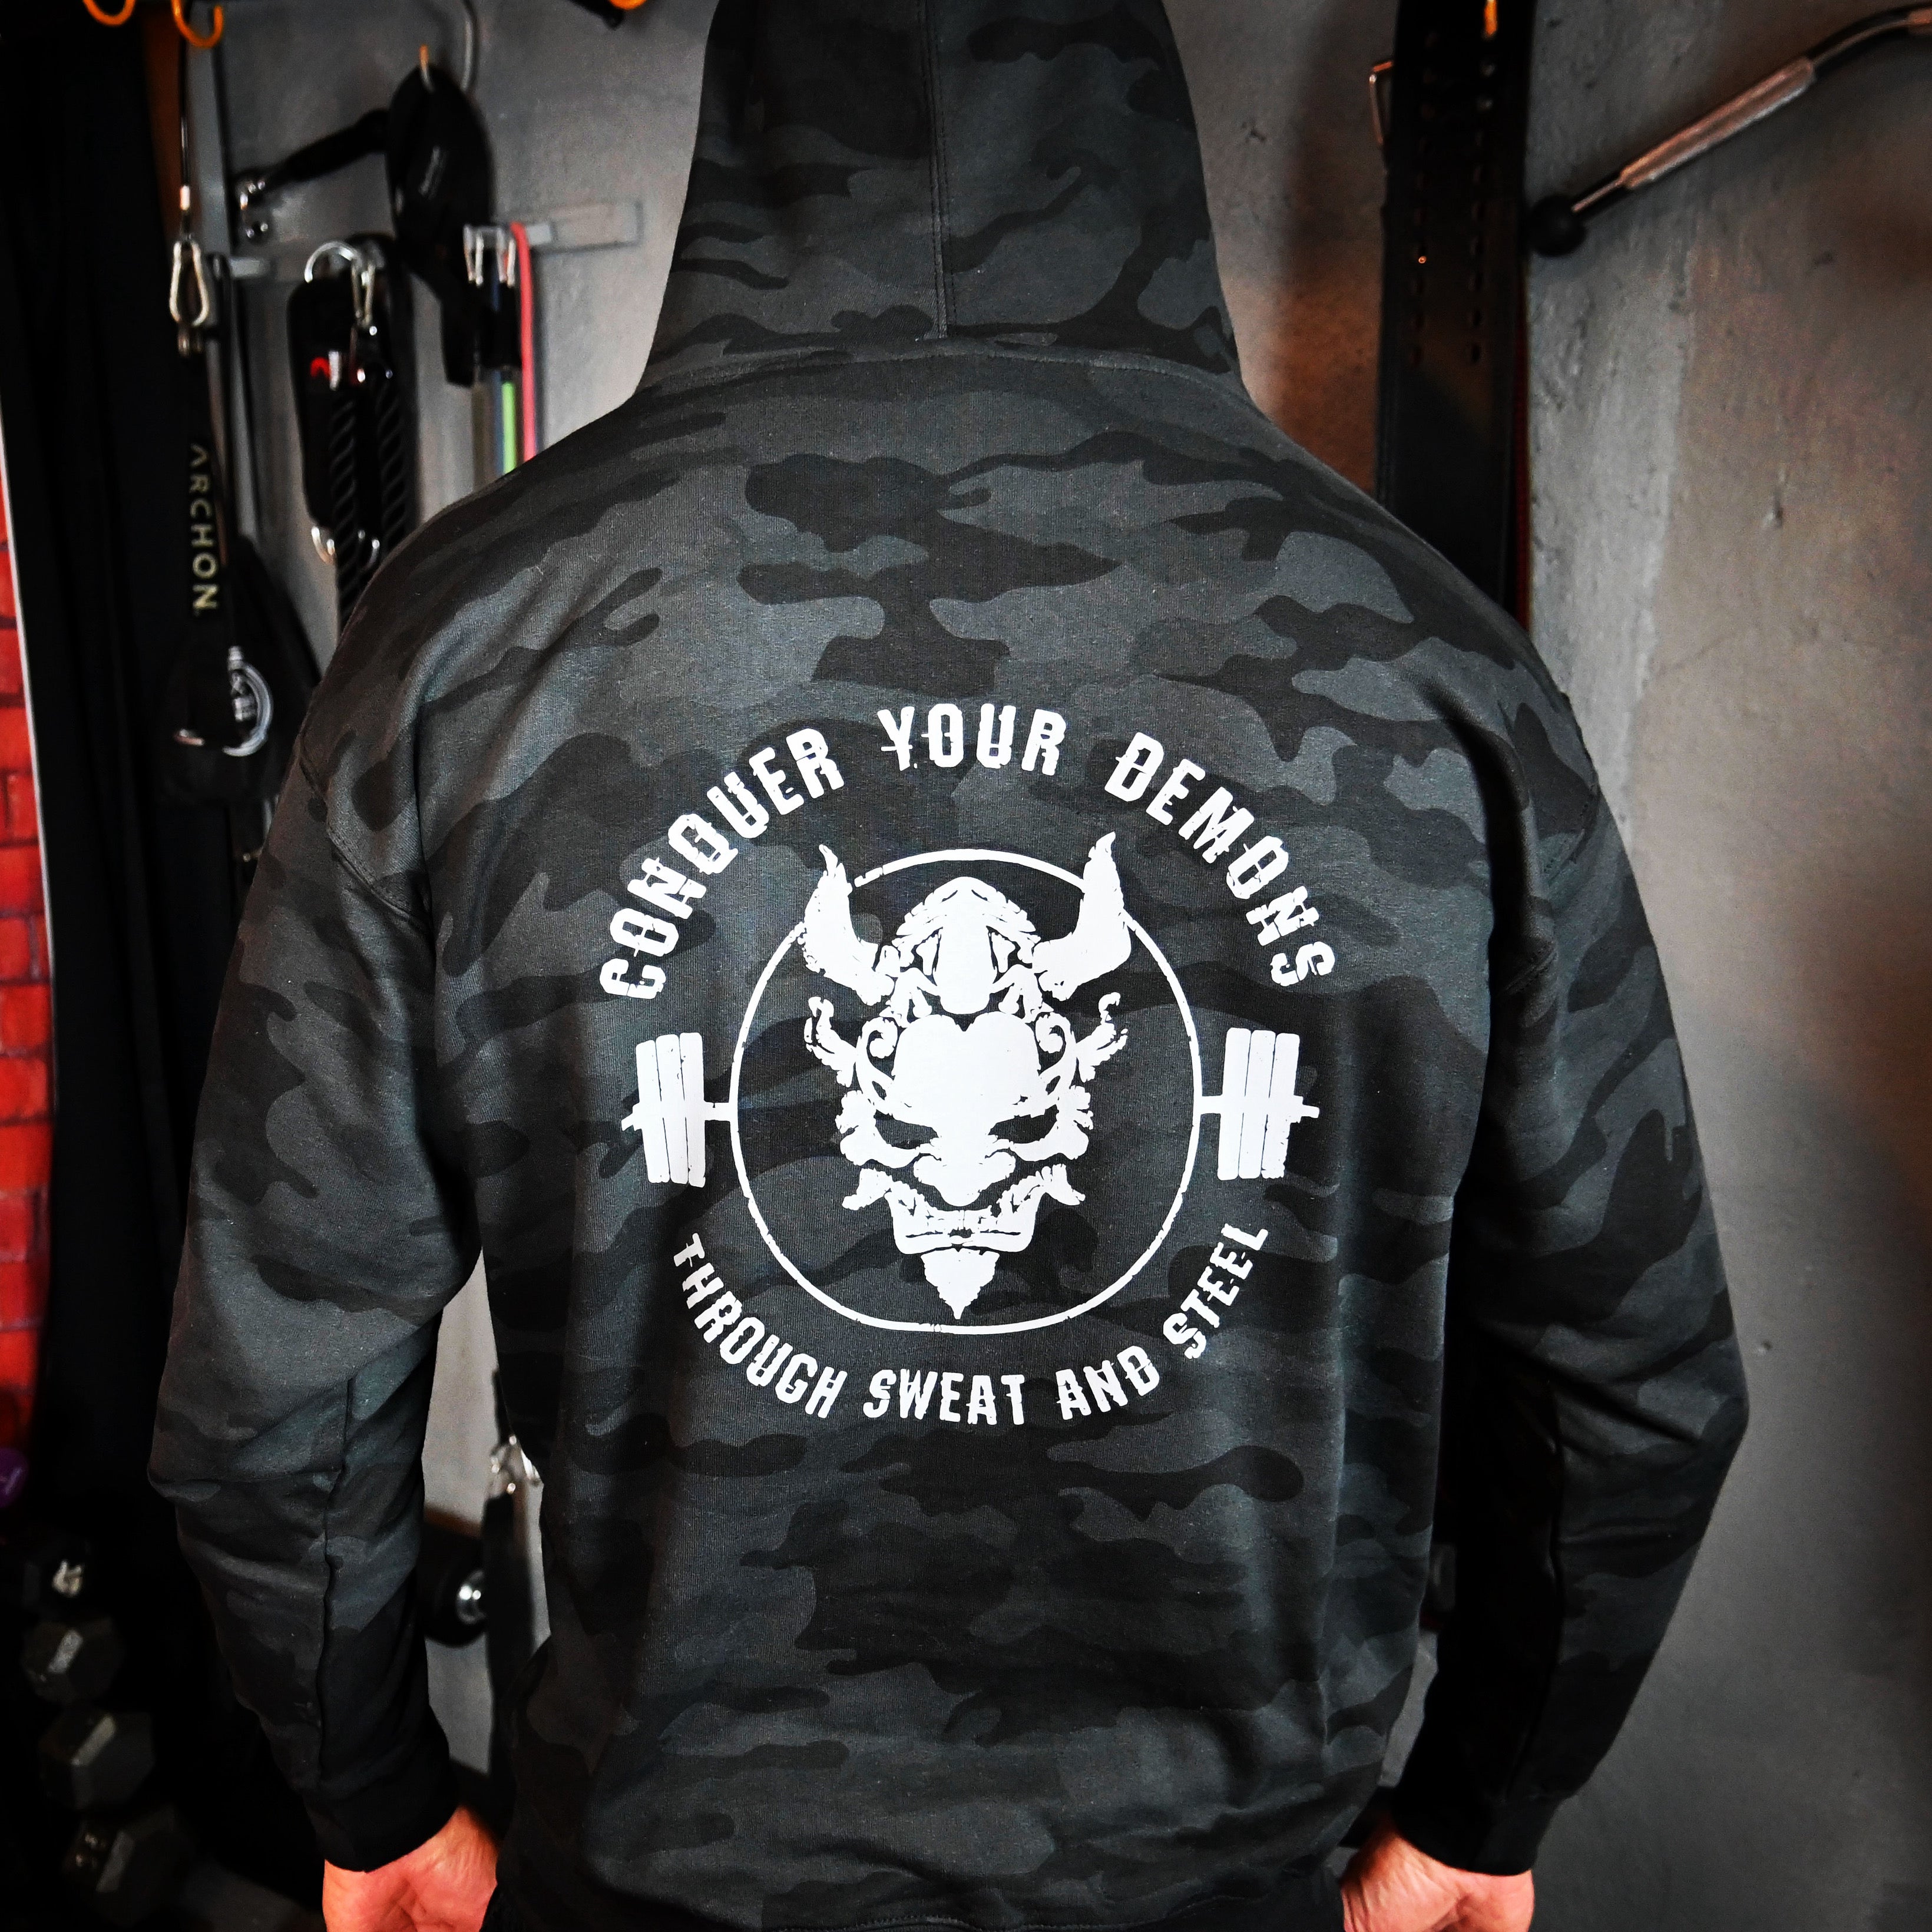 CONQUER YOUR DEMONS MIDWEIGHT HOODIE - CHARCOAL